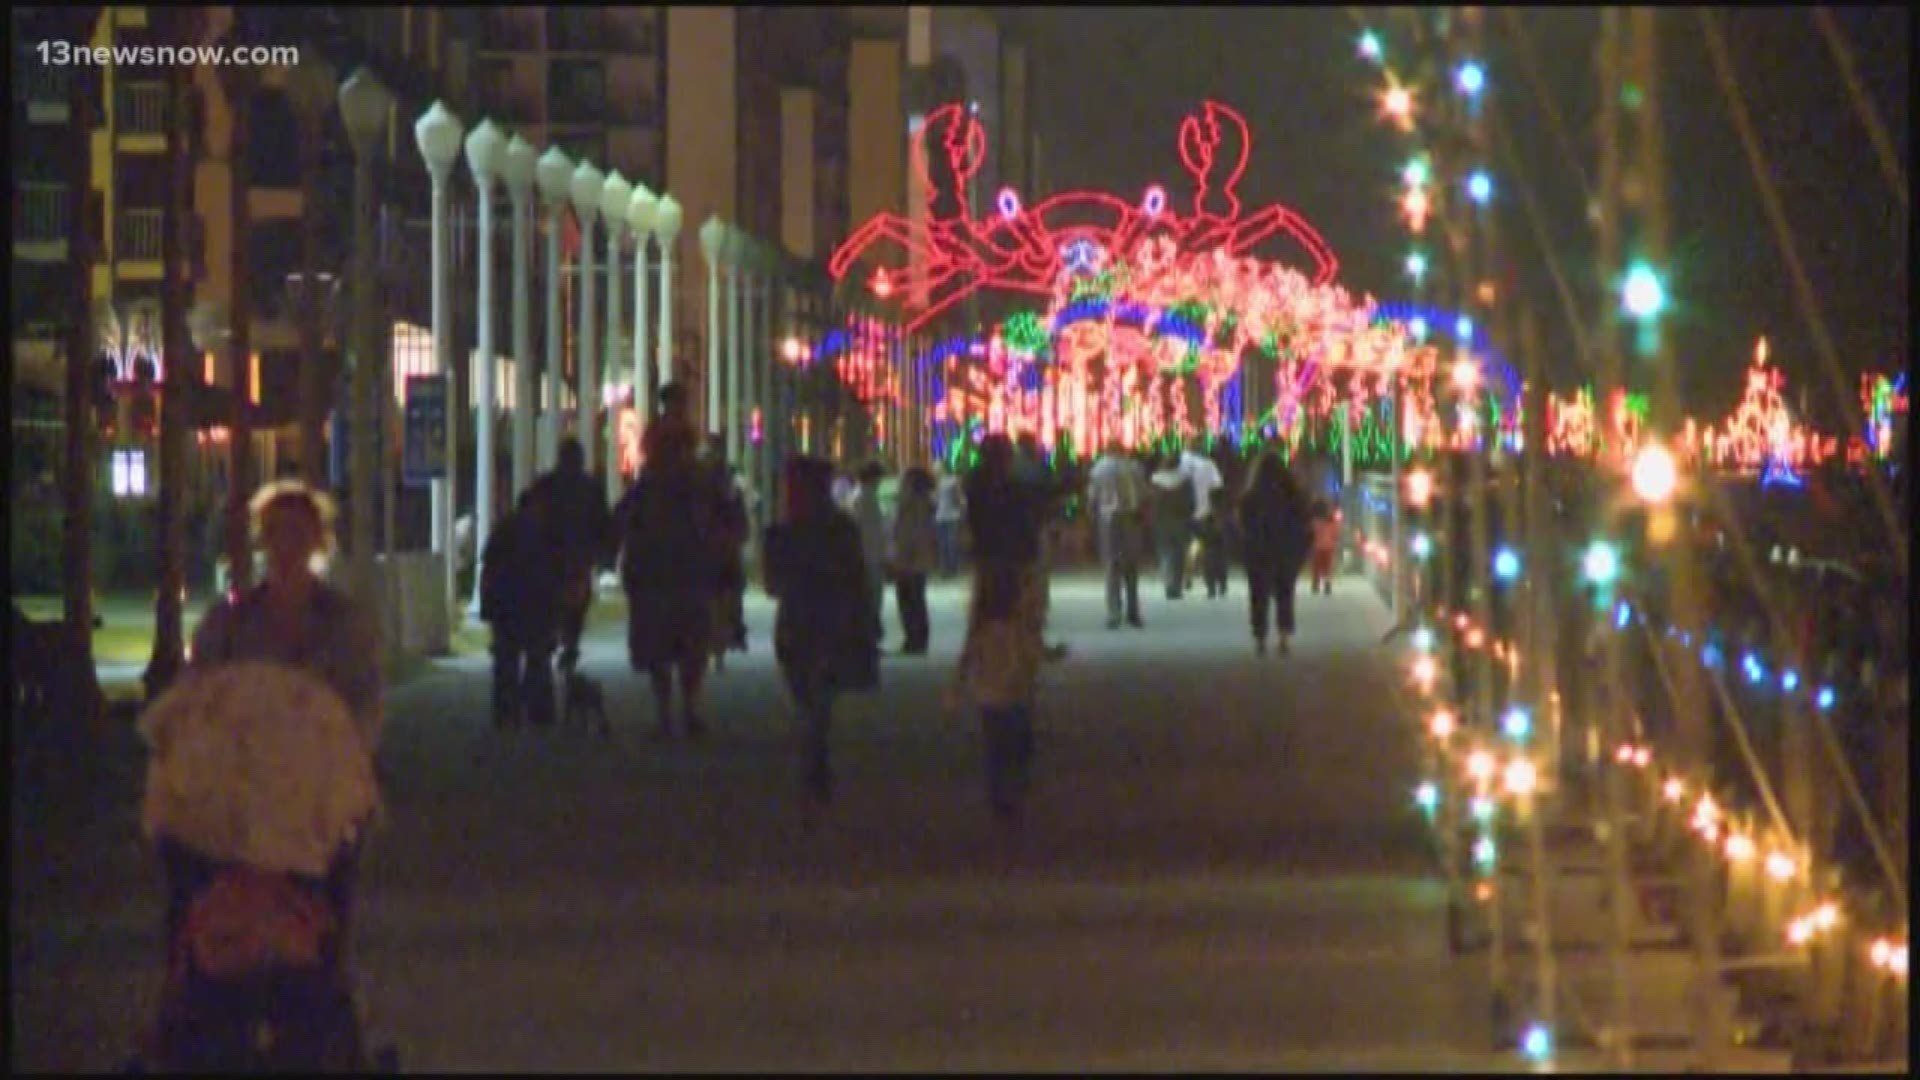 Along the Virginia Beach Boardwalk, twinkling lights will be on display starting Nov. 22. The holiday tradition is a fan favorite in the area.